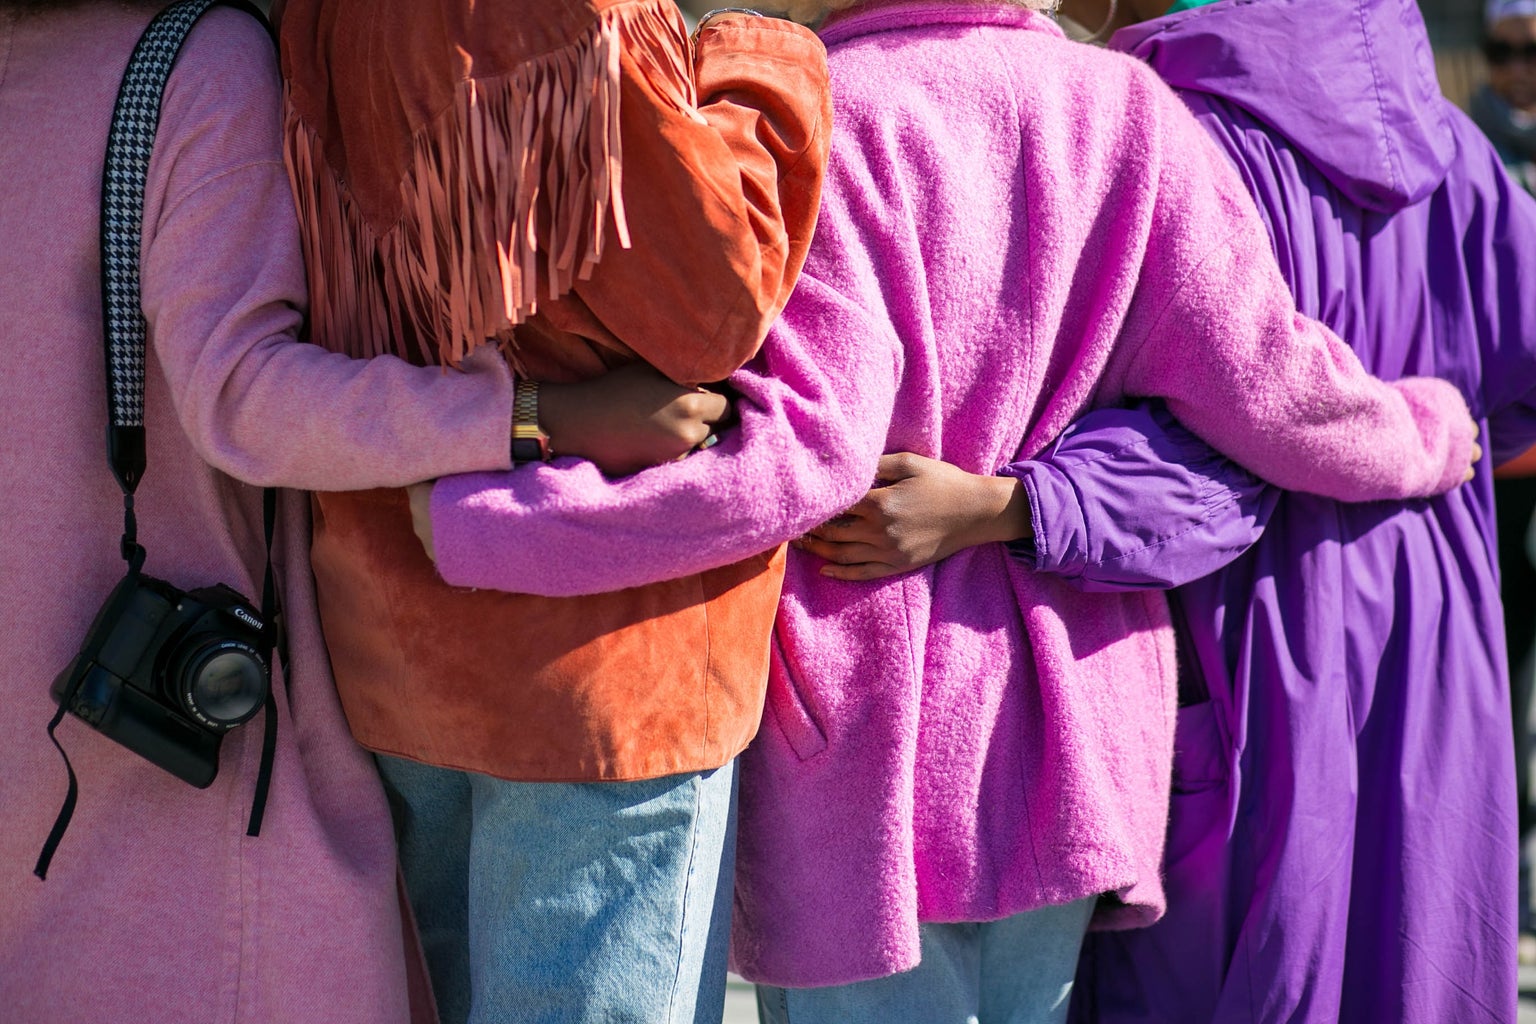 Four people hugging in really nice purple and orange jackets (no faces or legs included- just their backs)